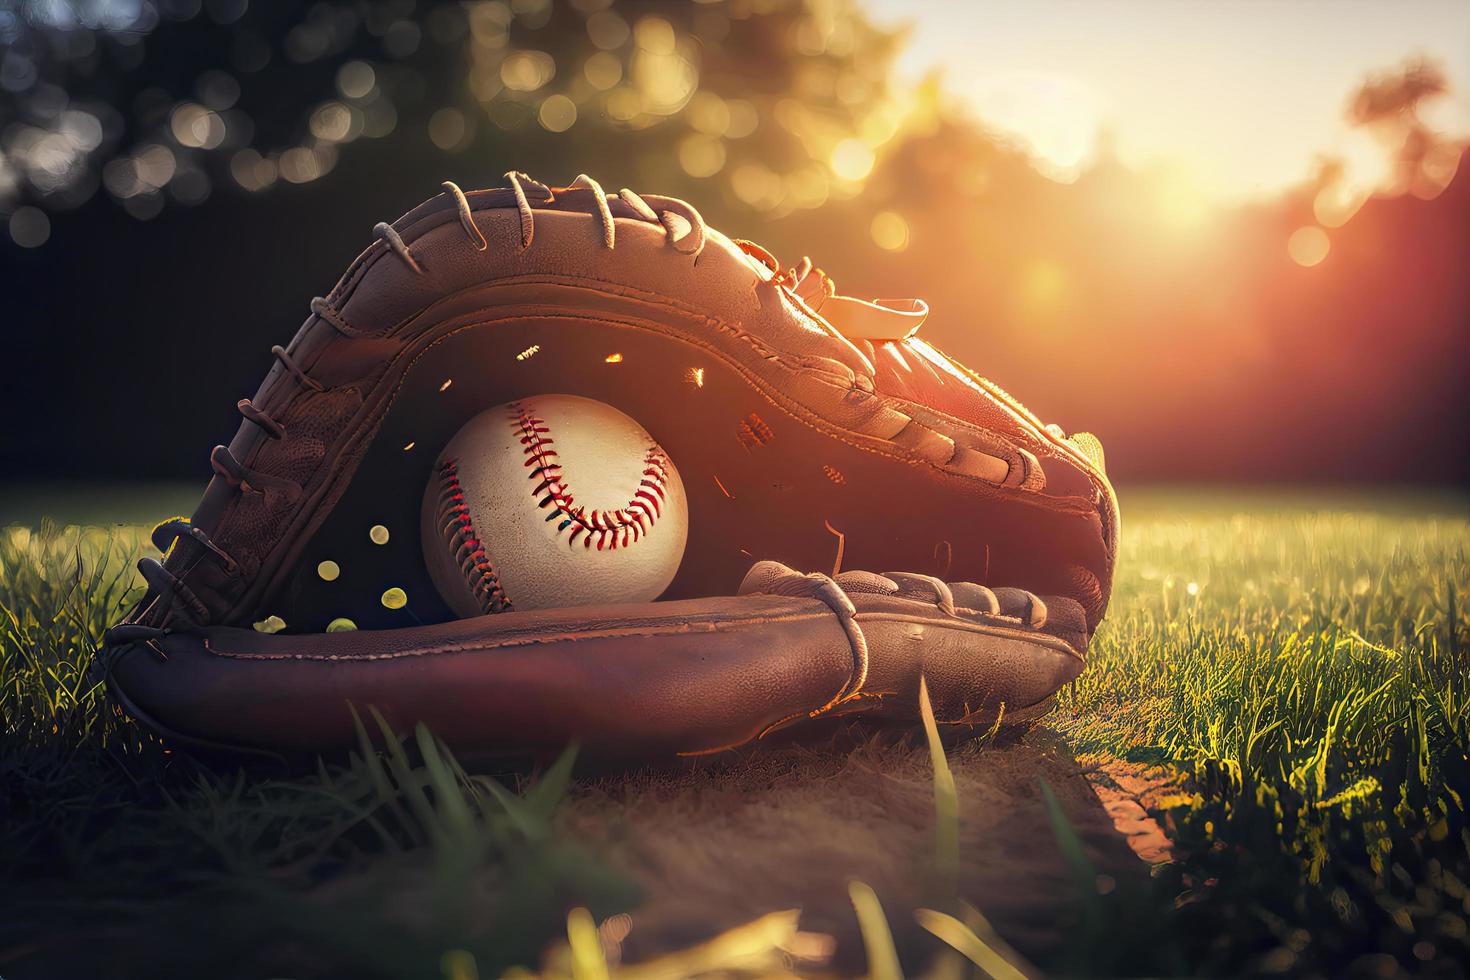 Baseball in glove in the lawn at sunset in the evening day with sun ray and lens flare light photo